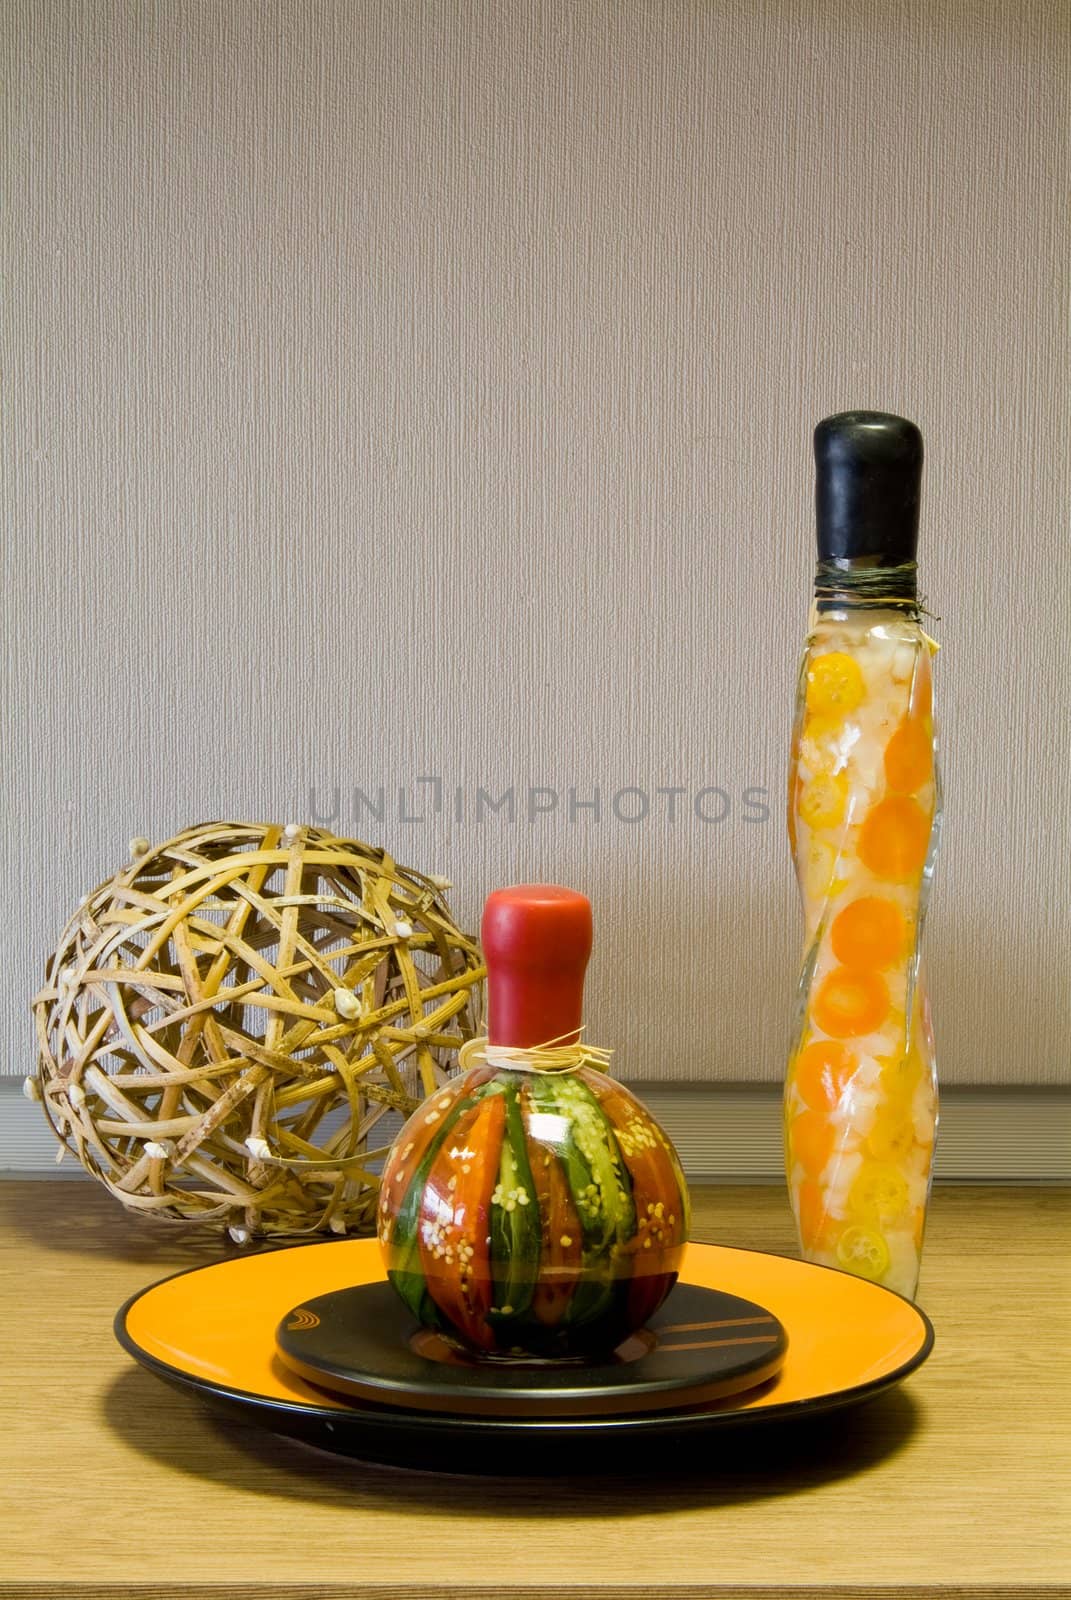 Decorative bottles, straw sphere and the ceramic plate on the ta by palomnik